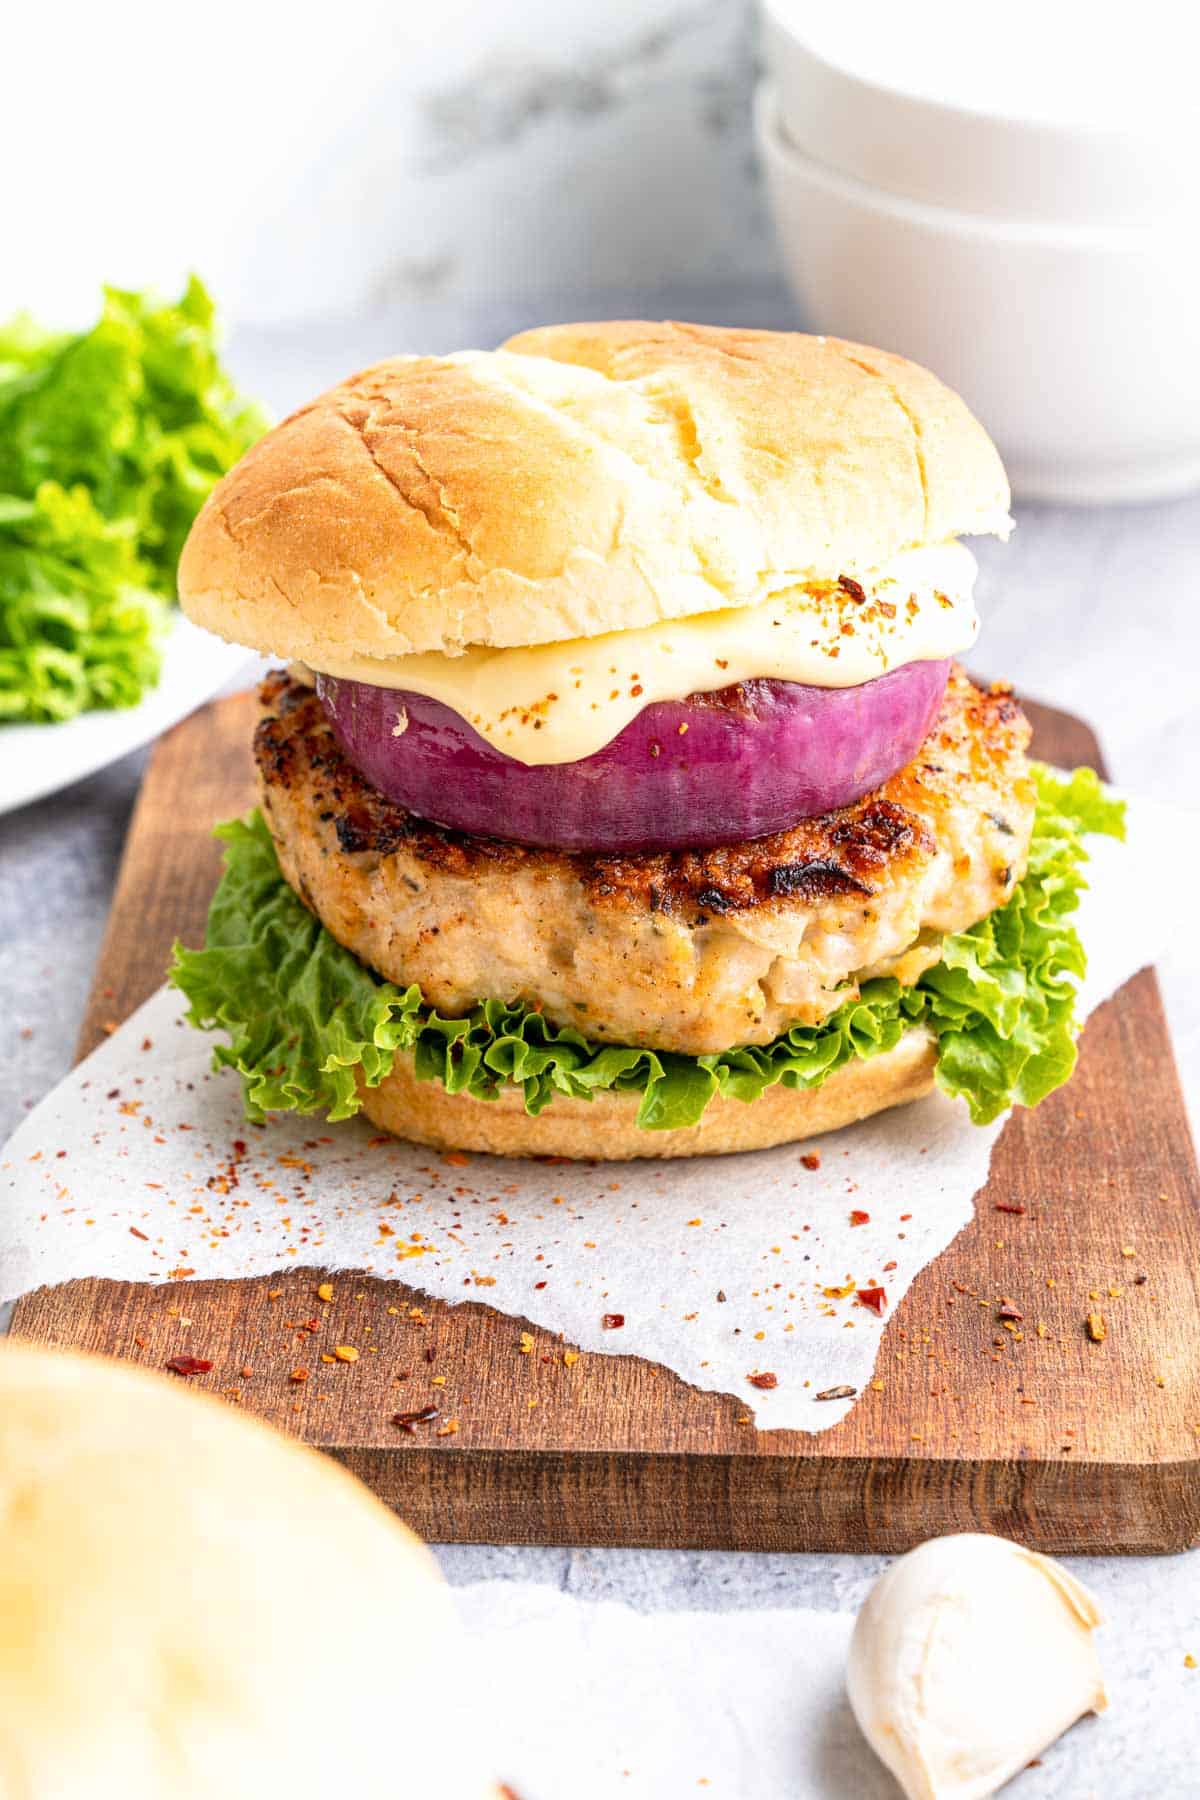 A chicken burger on a bun with lettuce, red onion, and sauce.